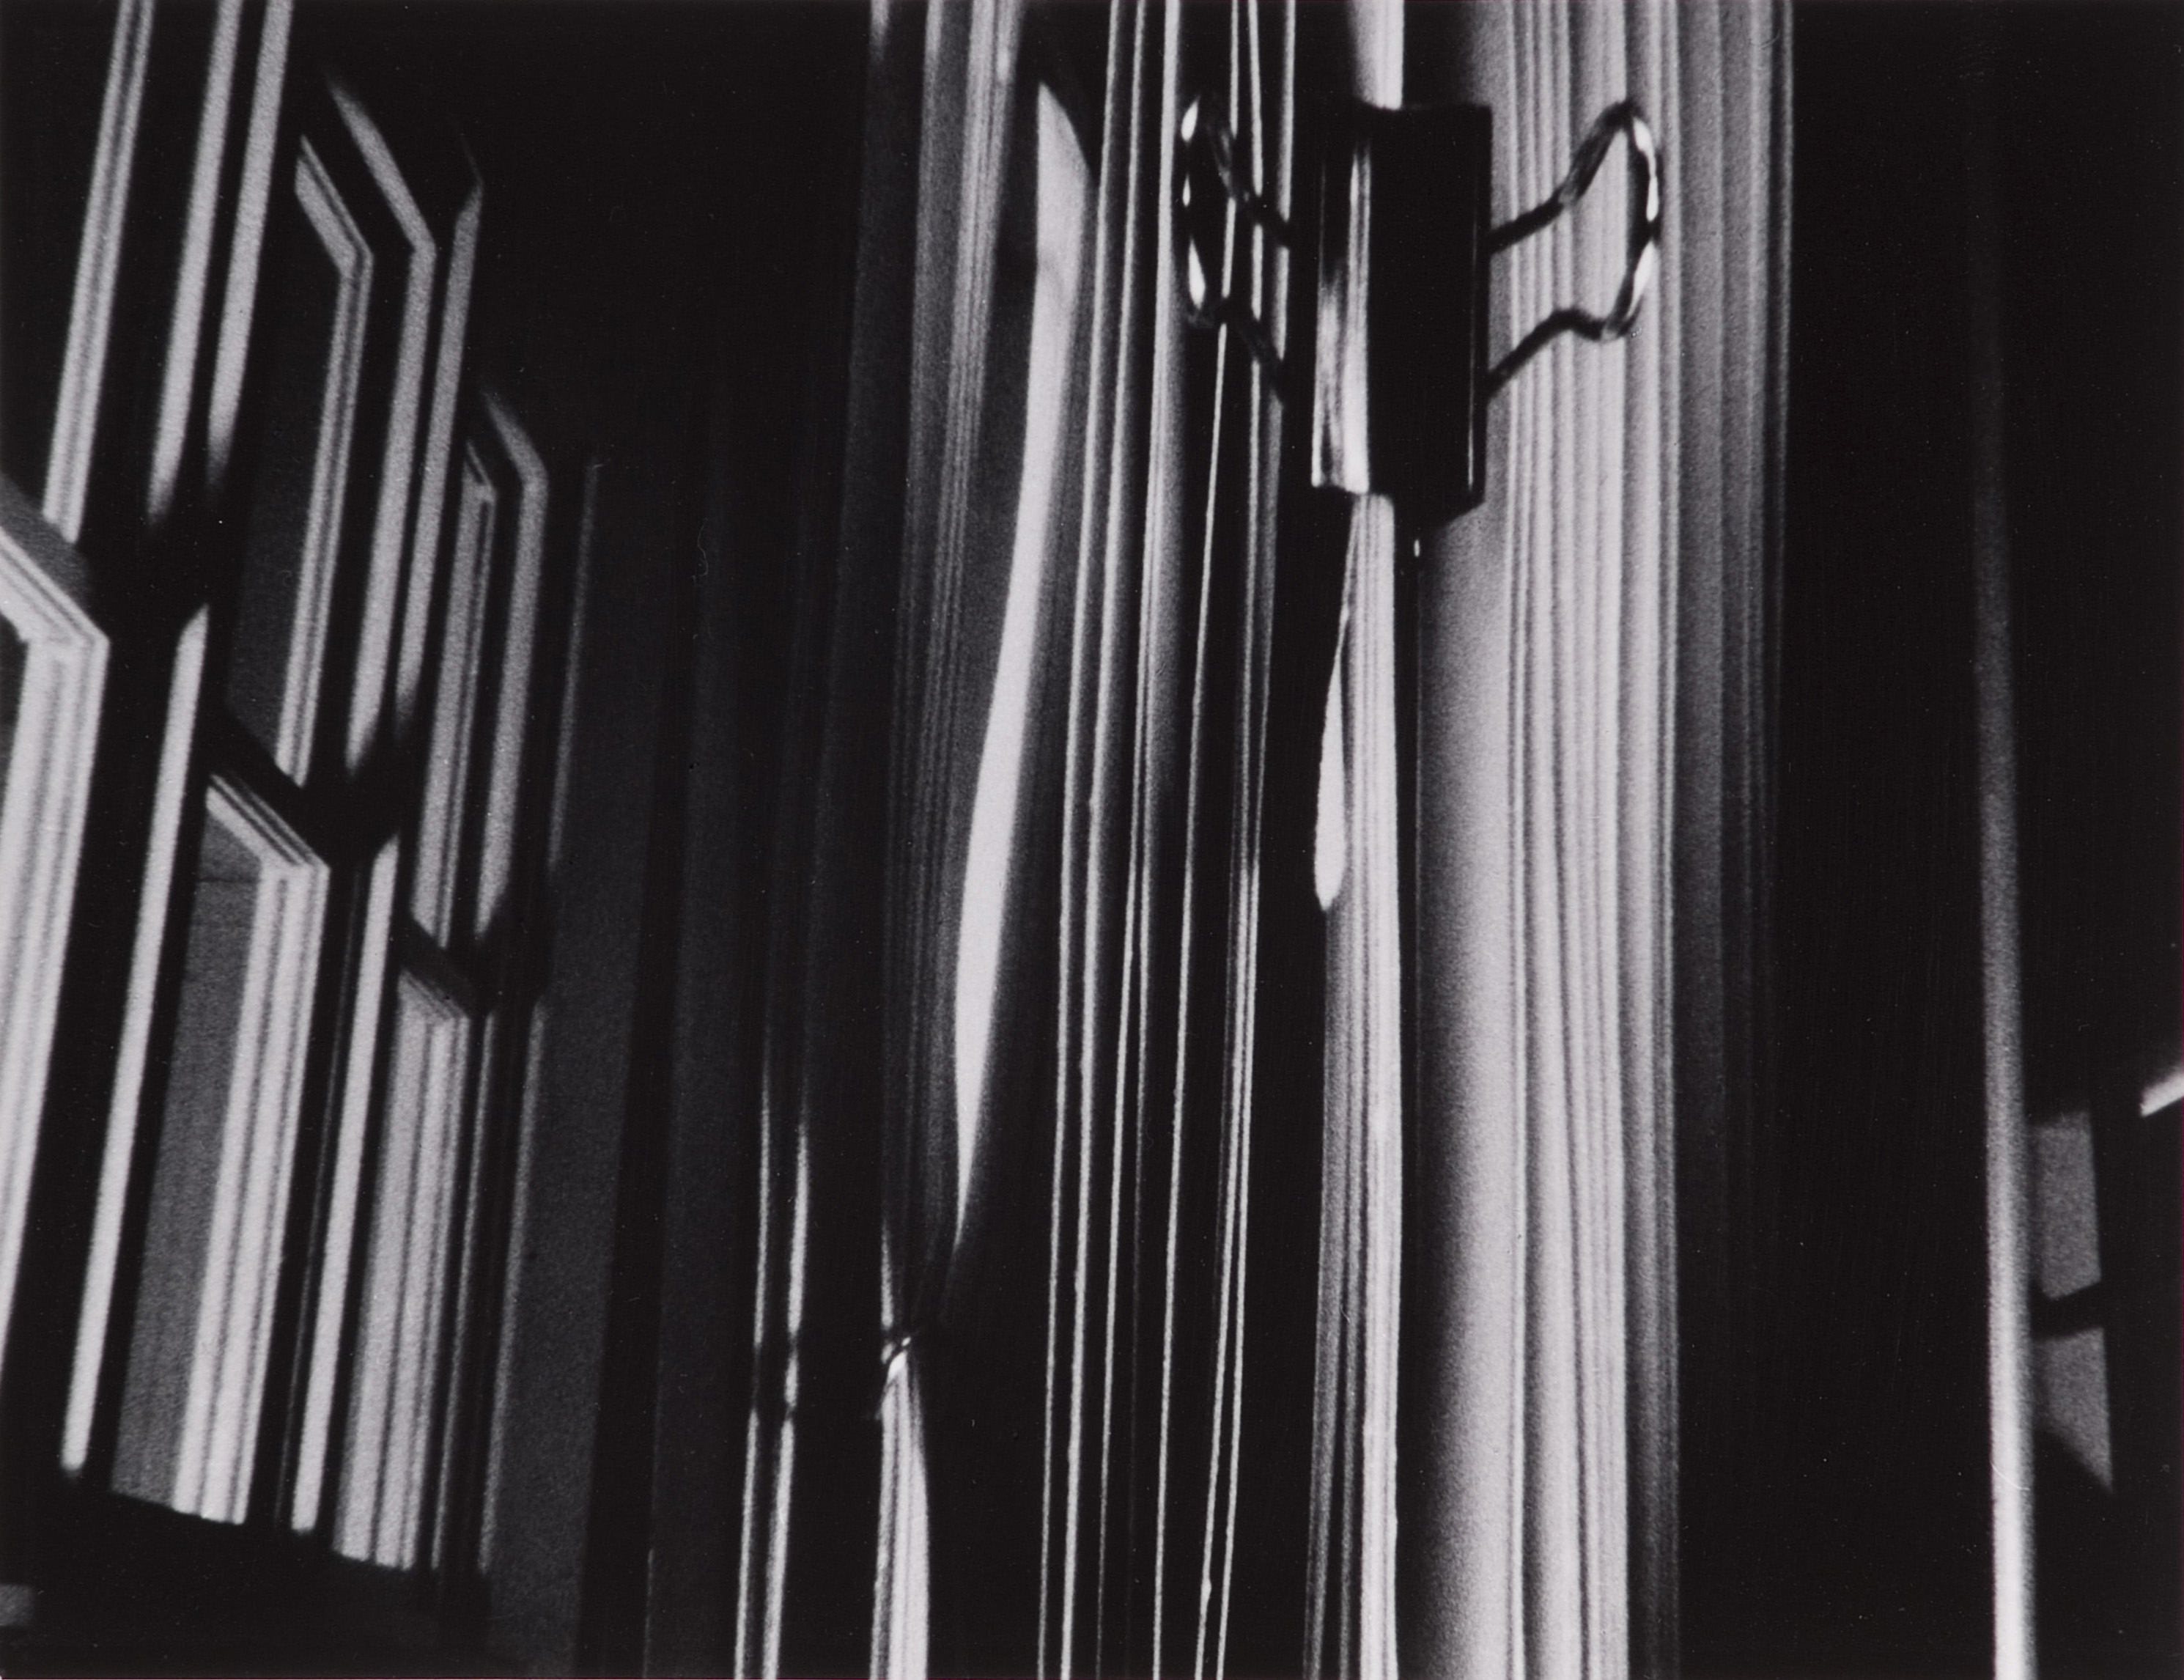 Untitled (3251.2), from The Christina Suite